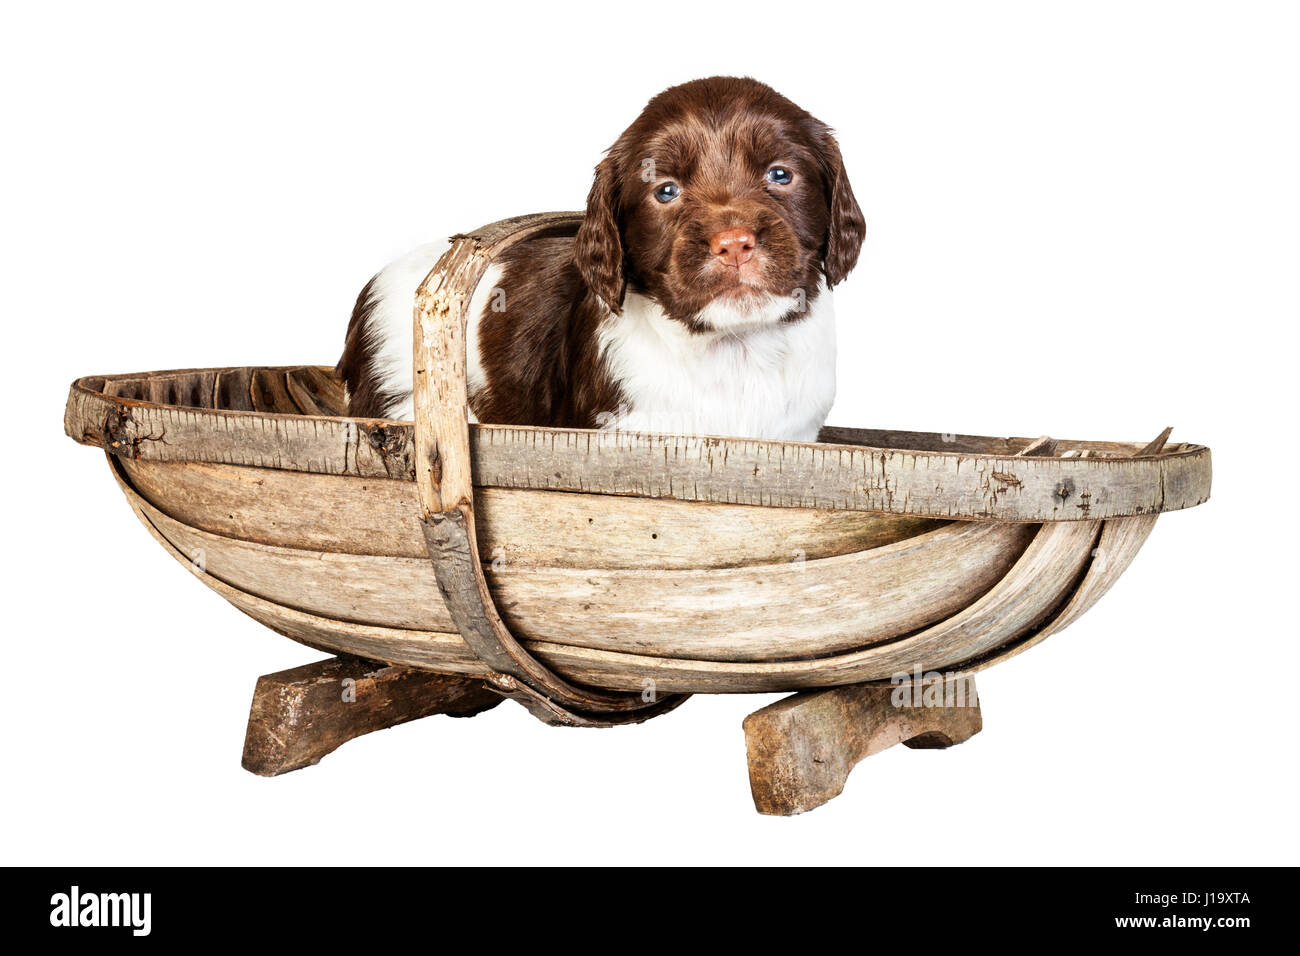 A 4 week old liver and white English Springer Spaniel puppy in a trug Stock Photo